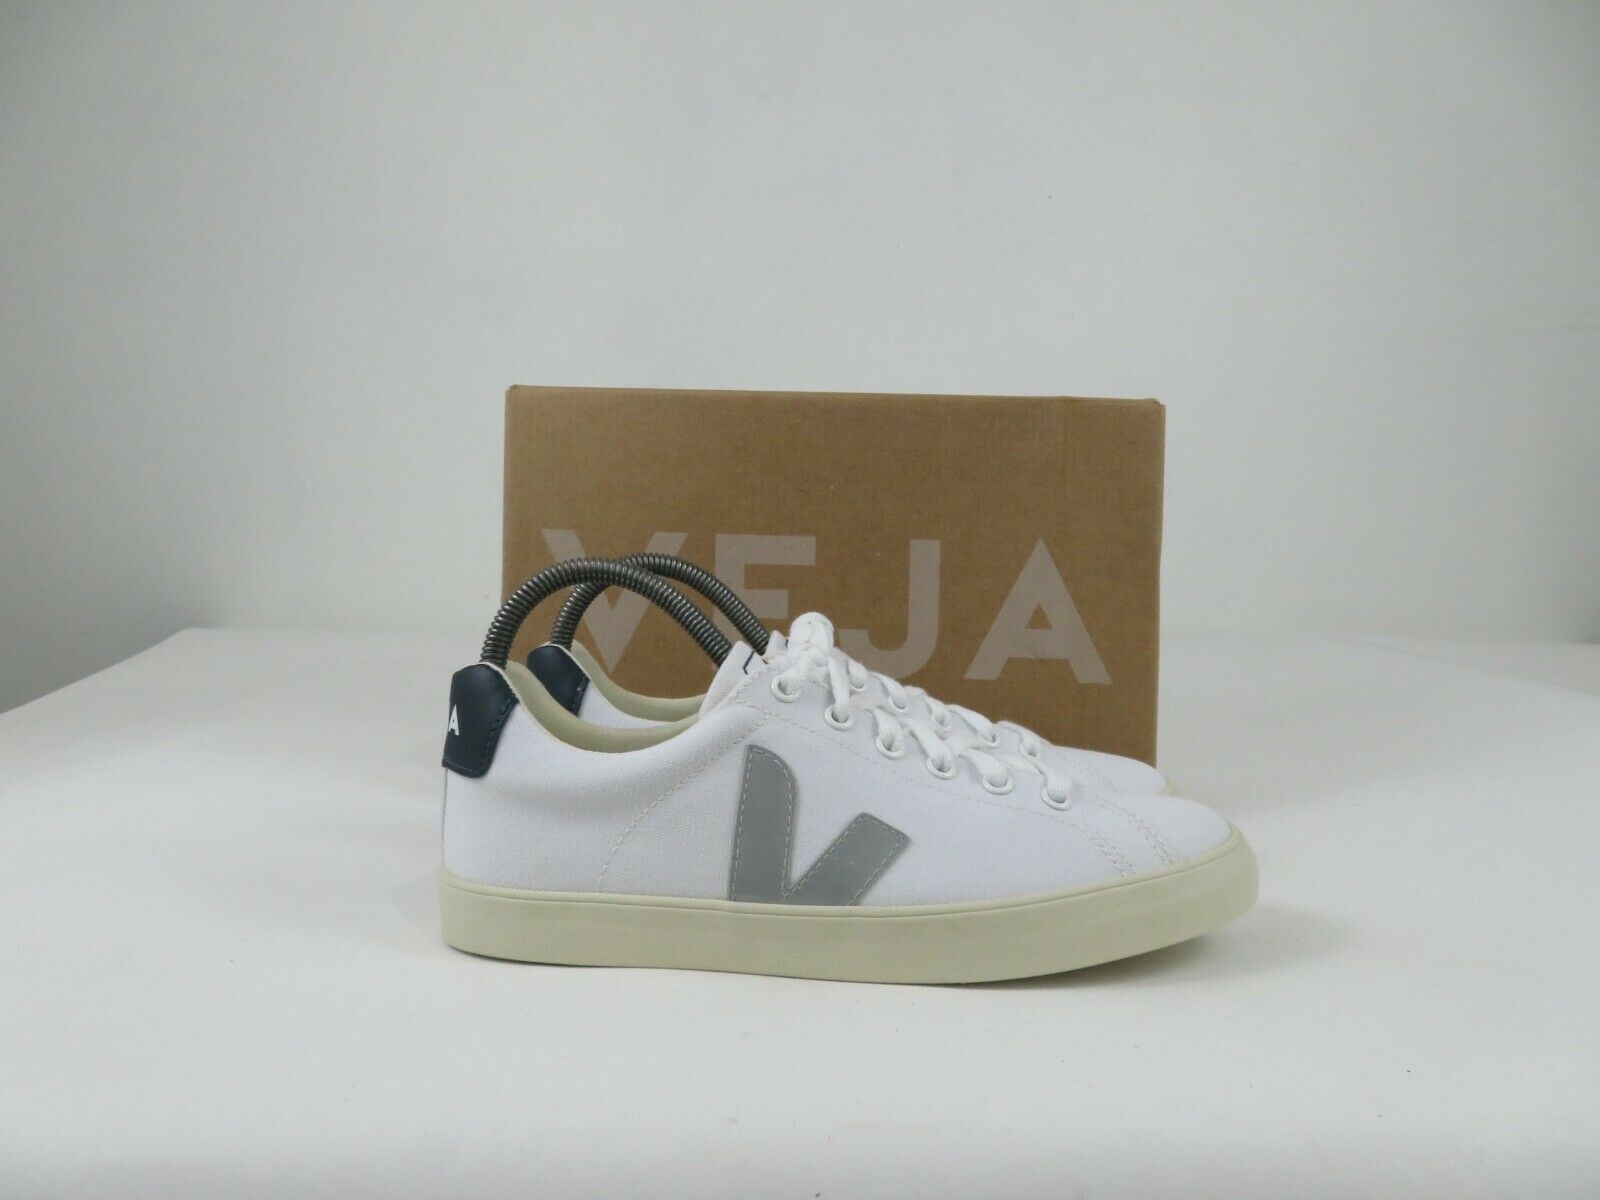 Veja Esplar SE Canvas Shoes Womens 8 White Gray Lace Up Athletic Walking Casual